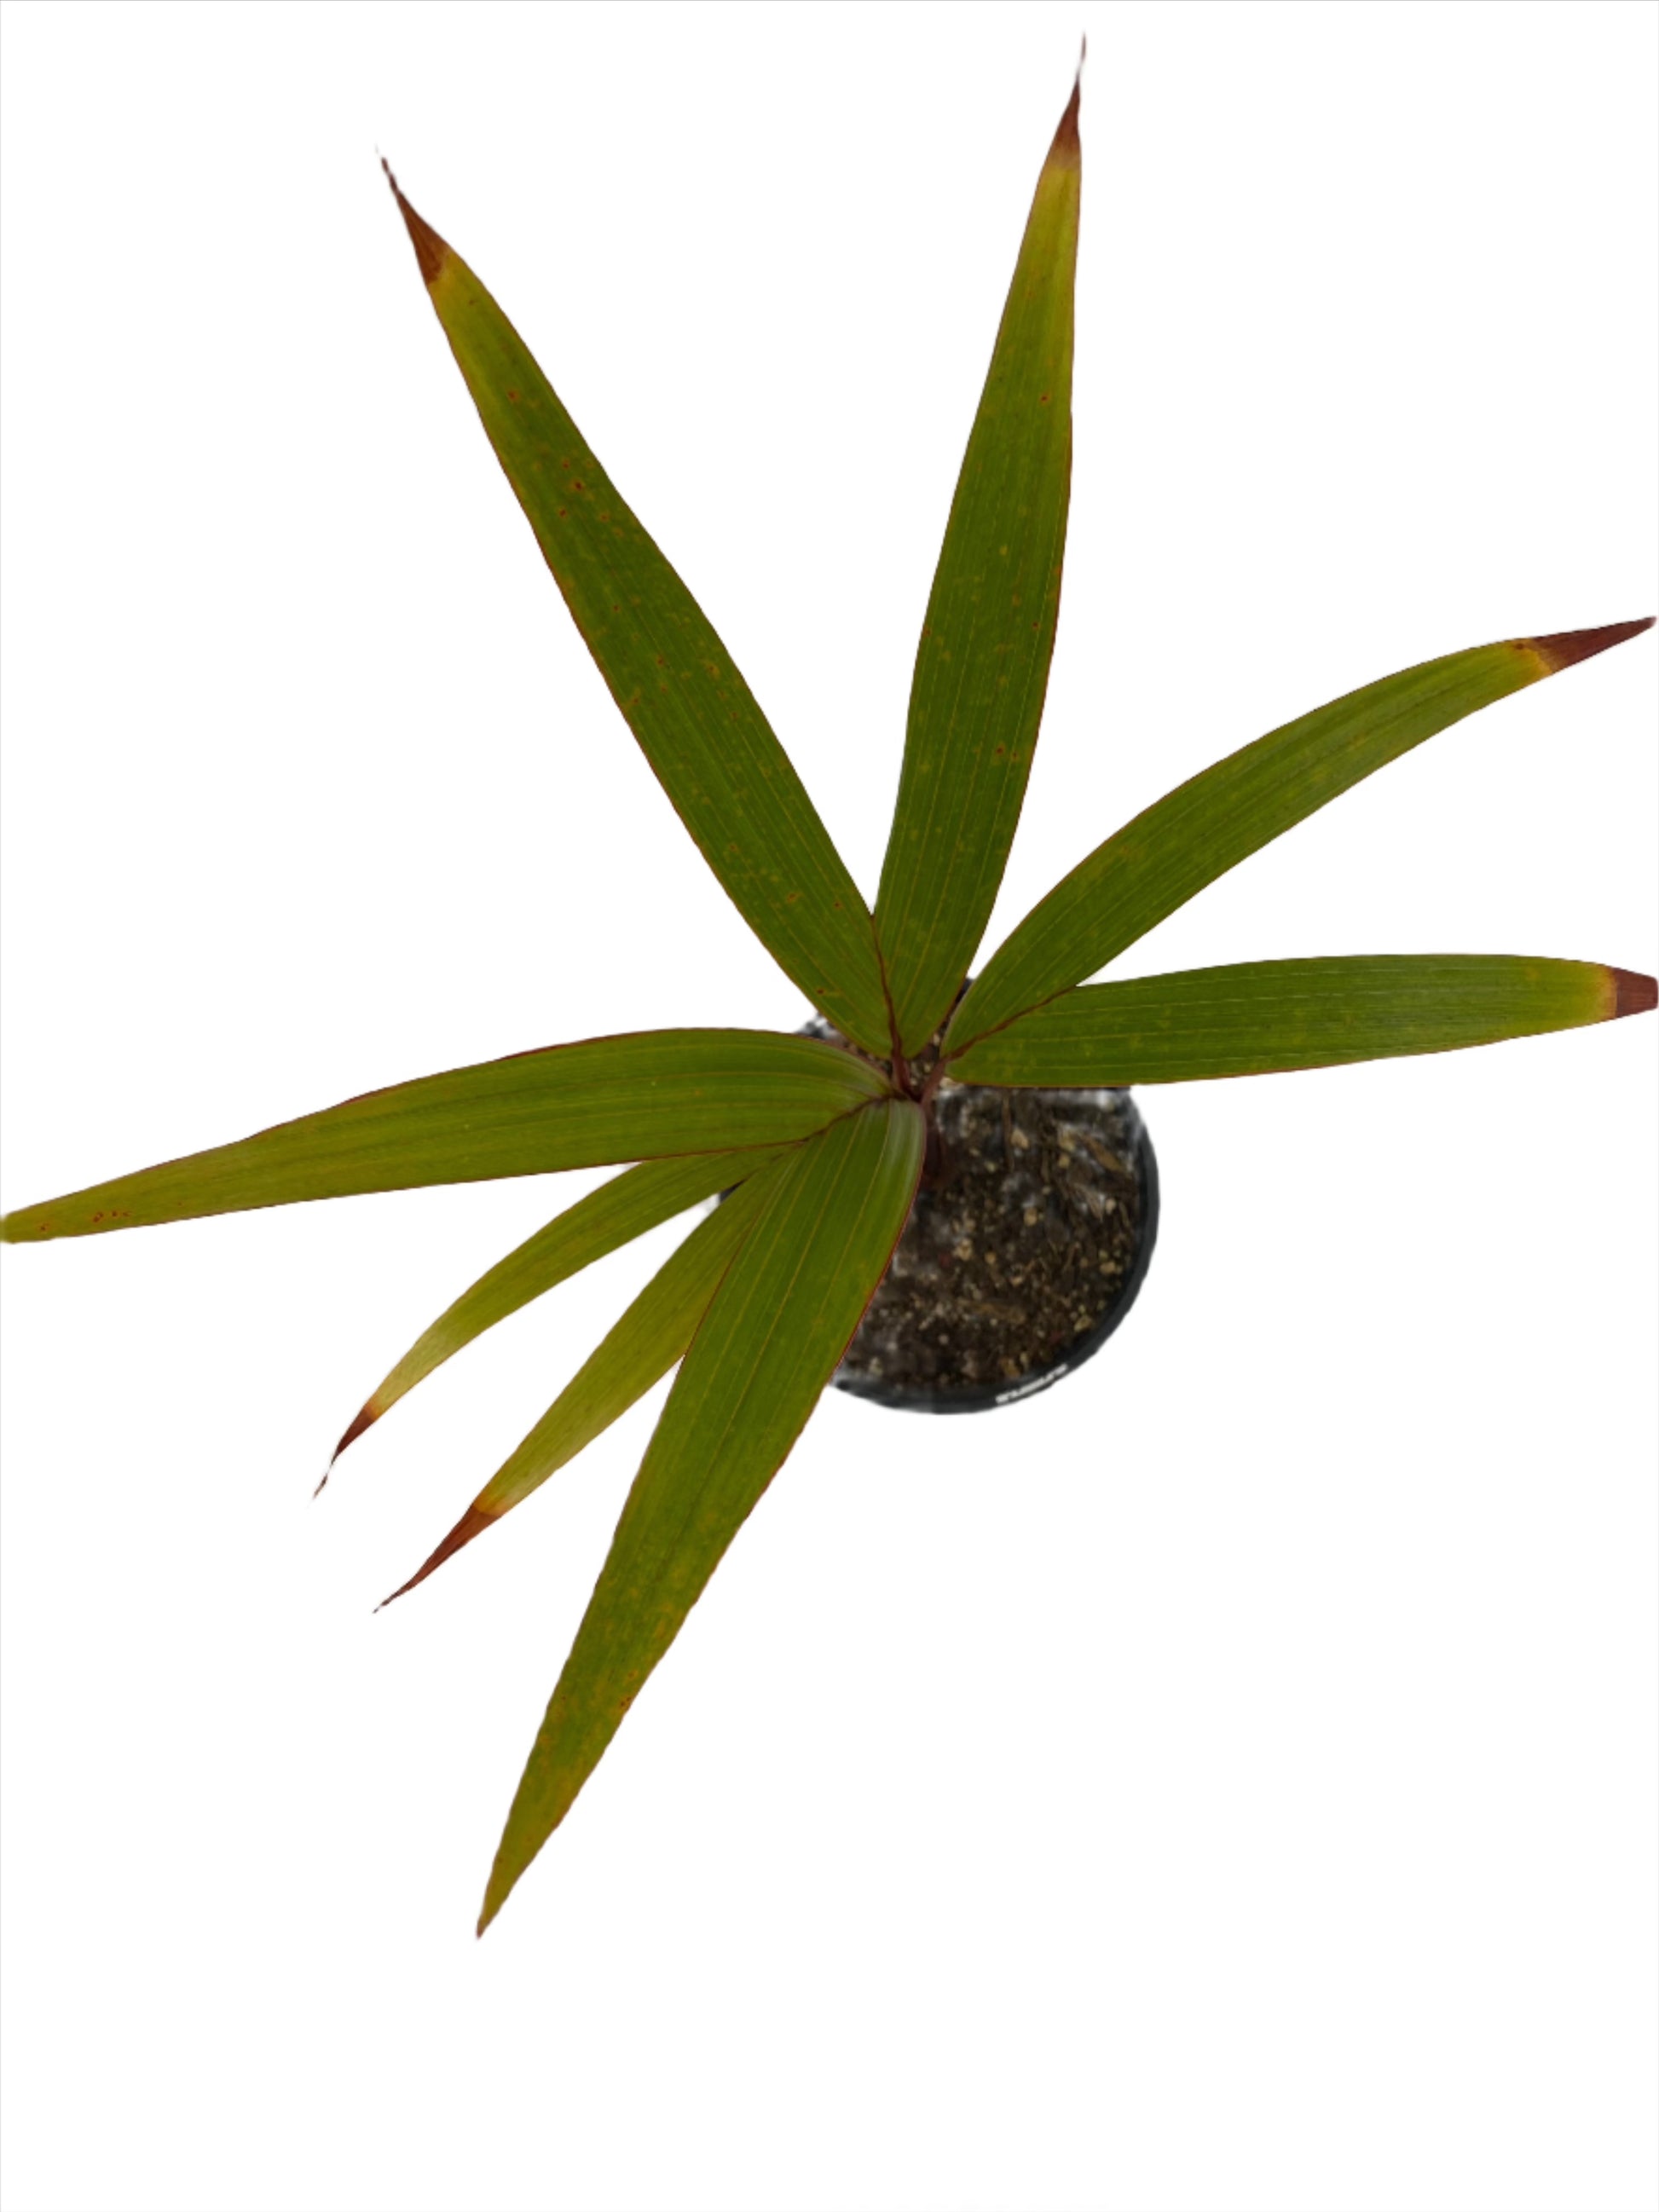 Top view of young potted Bottle Palm seedling